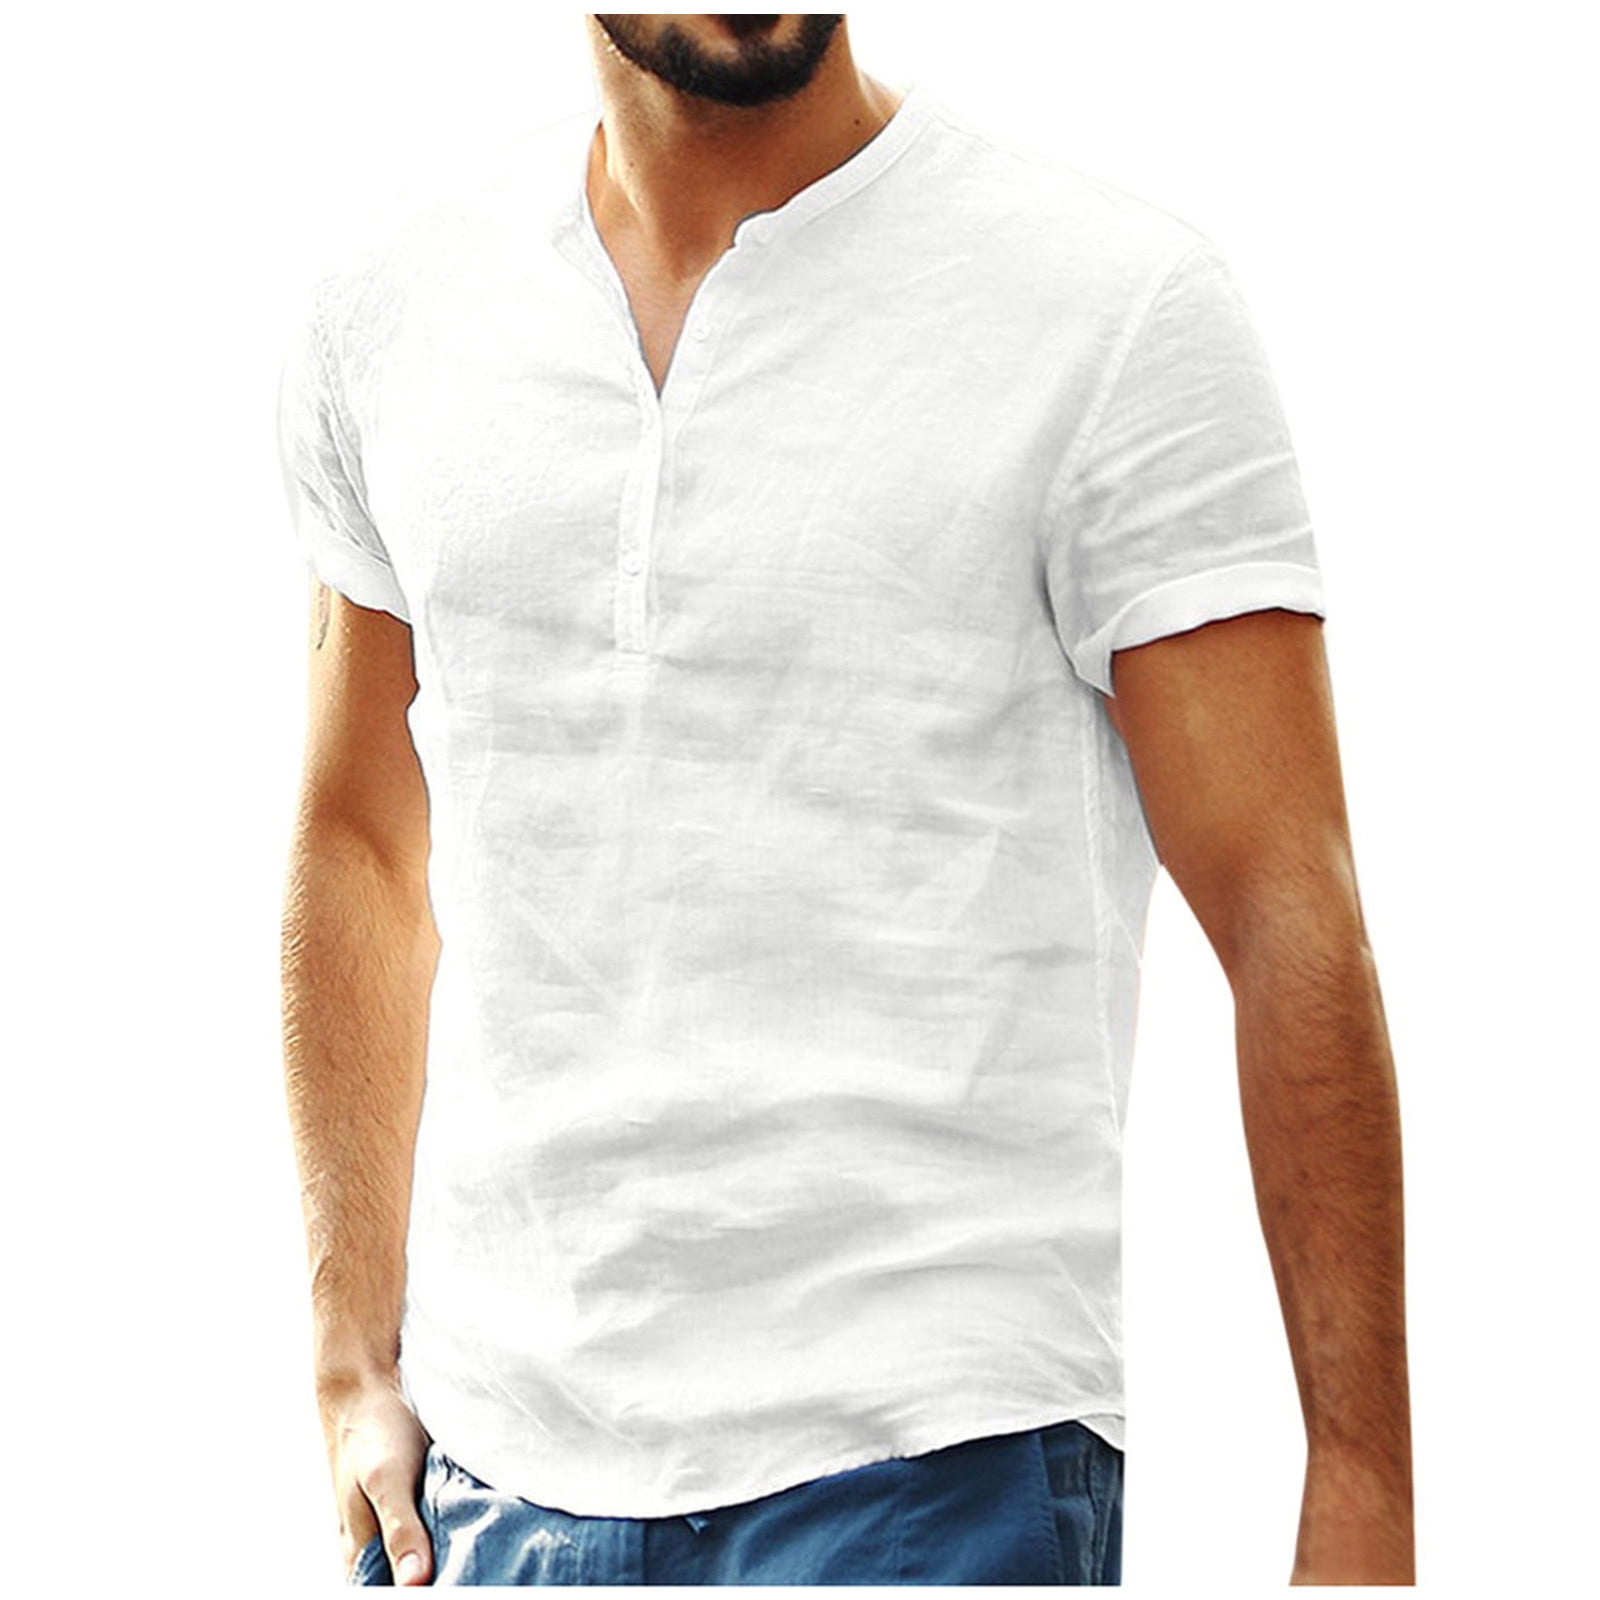 Huk Fishing Shirts For Men White T Shirts for Men Men's Baggy Cotton And  Linen Solid Short Sleeve V-Neck T-Shirts Tops Blouse Cotton tshirts for Men